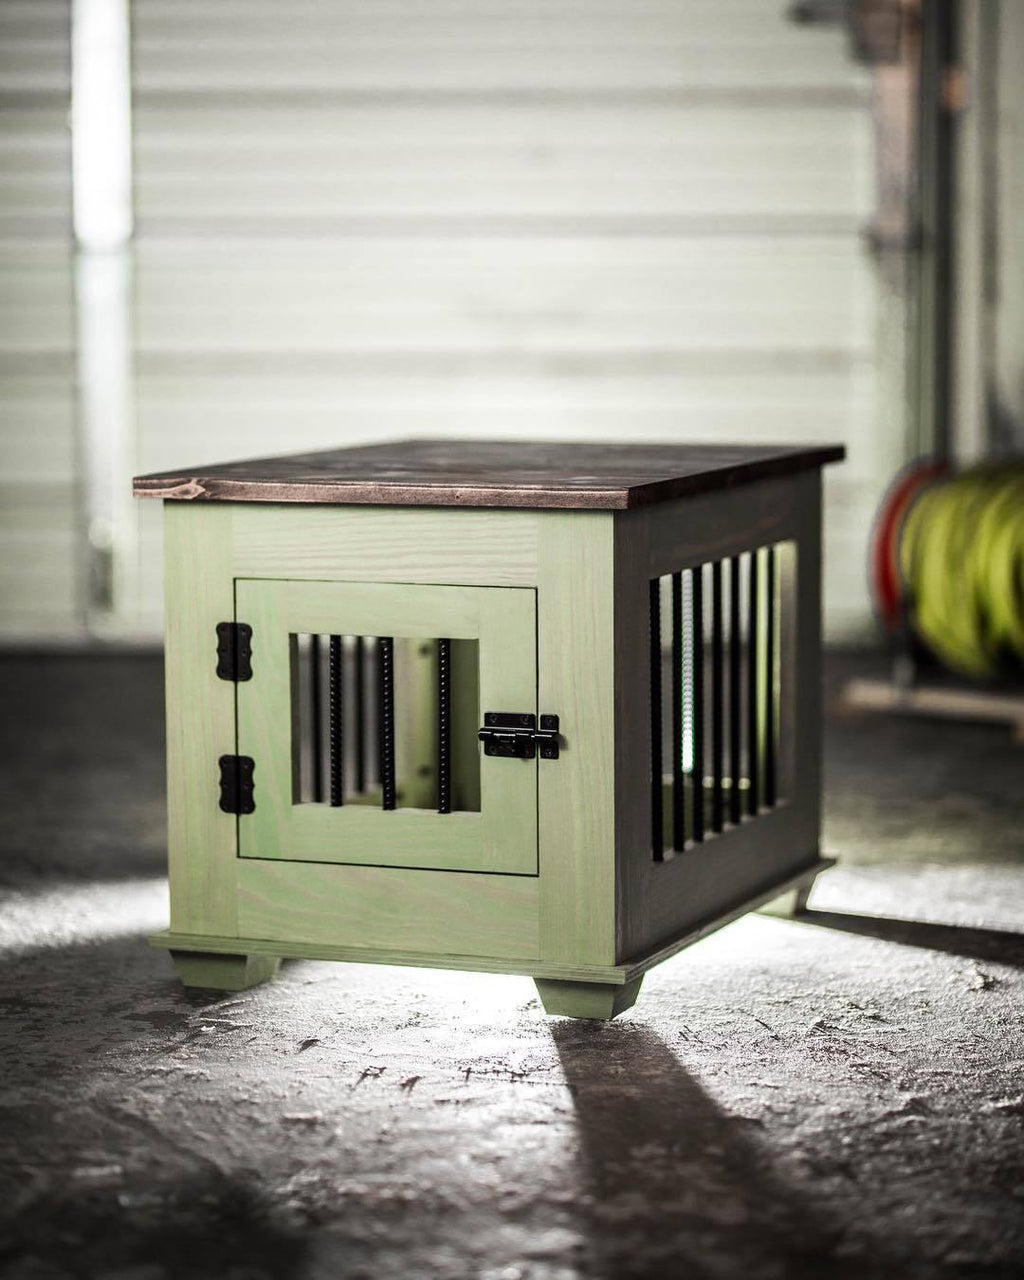 In-Stock Small Dog Crate Kennel End Table - Carolina Dog Crate Co.